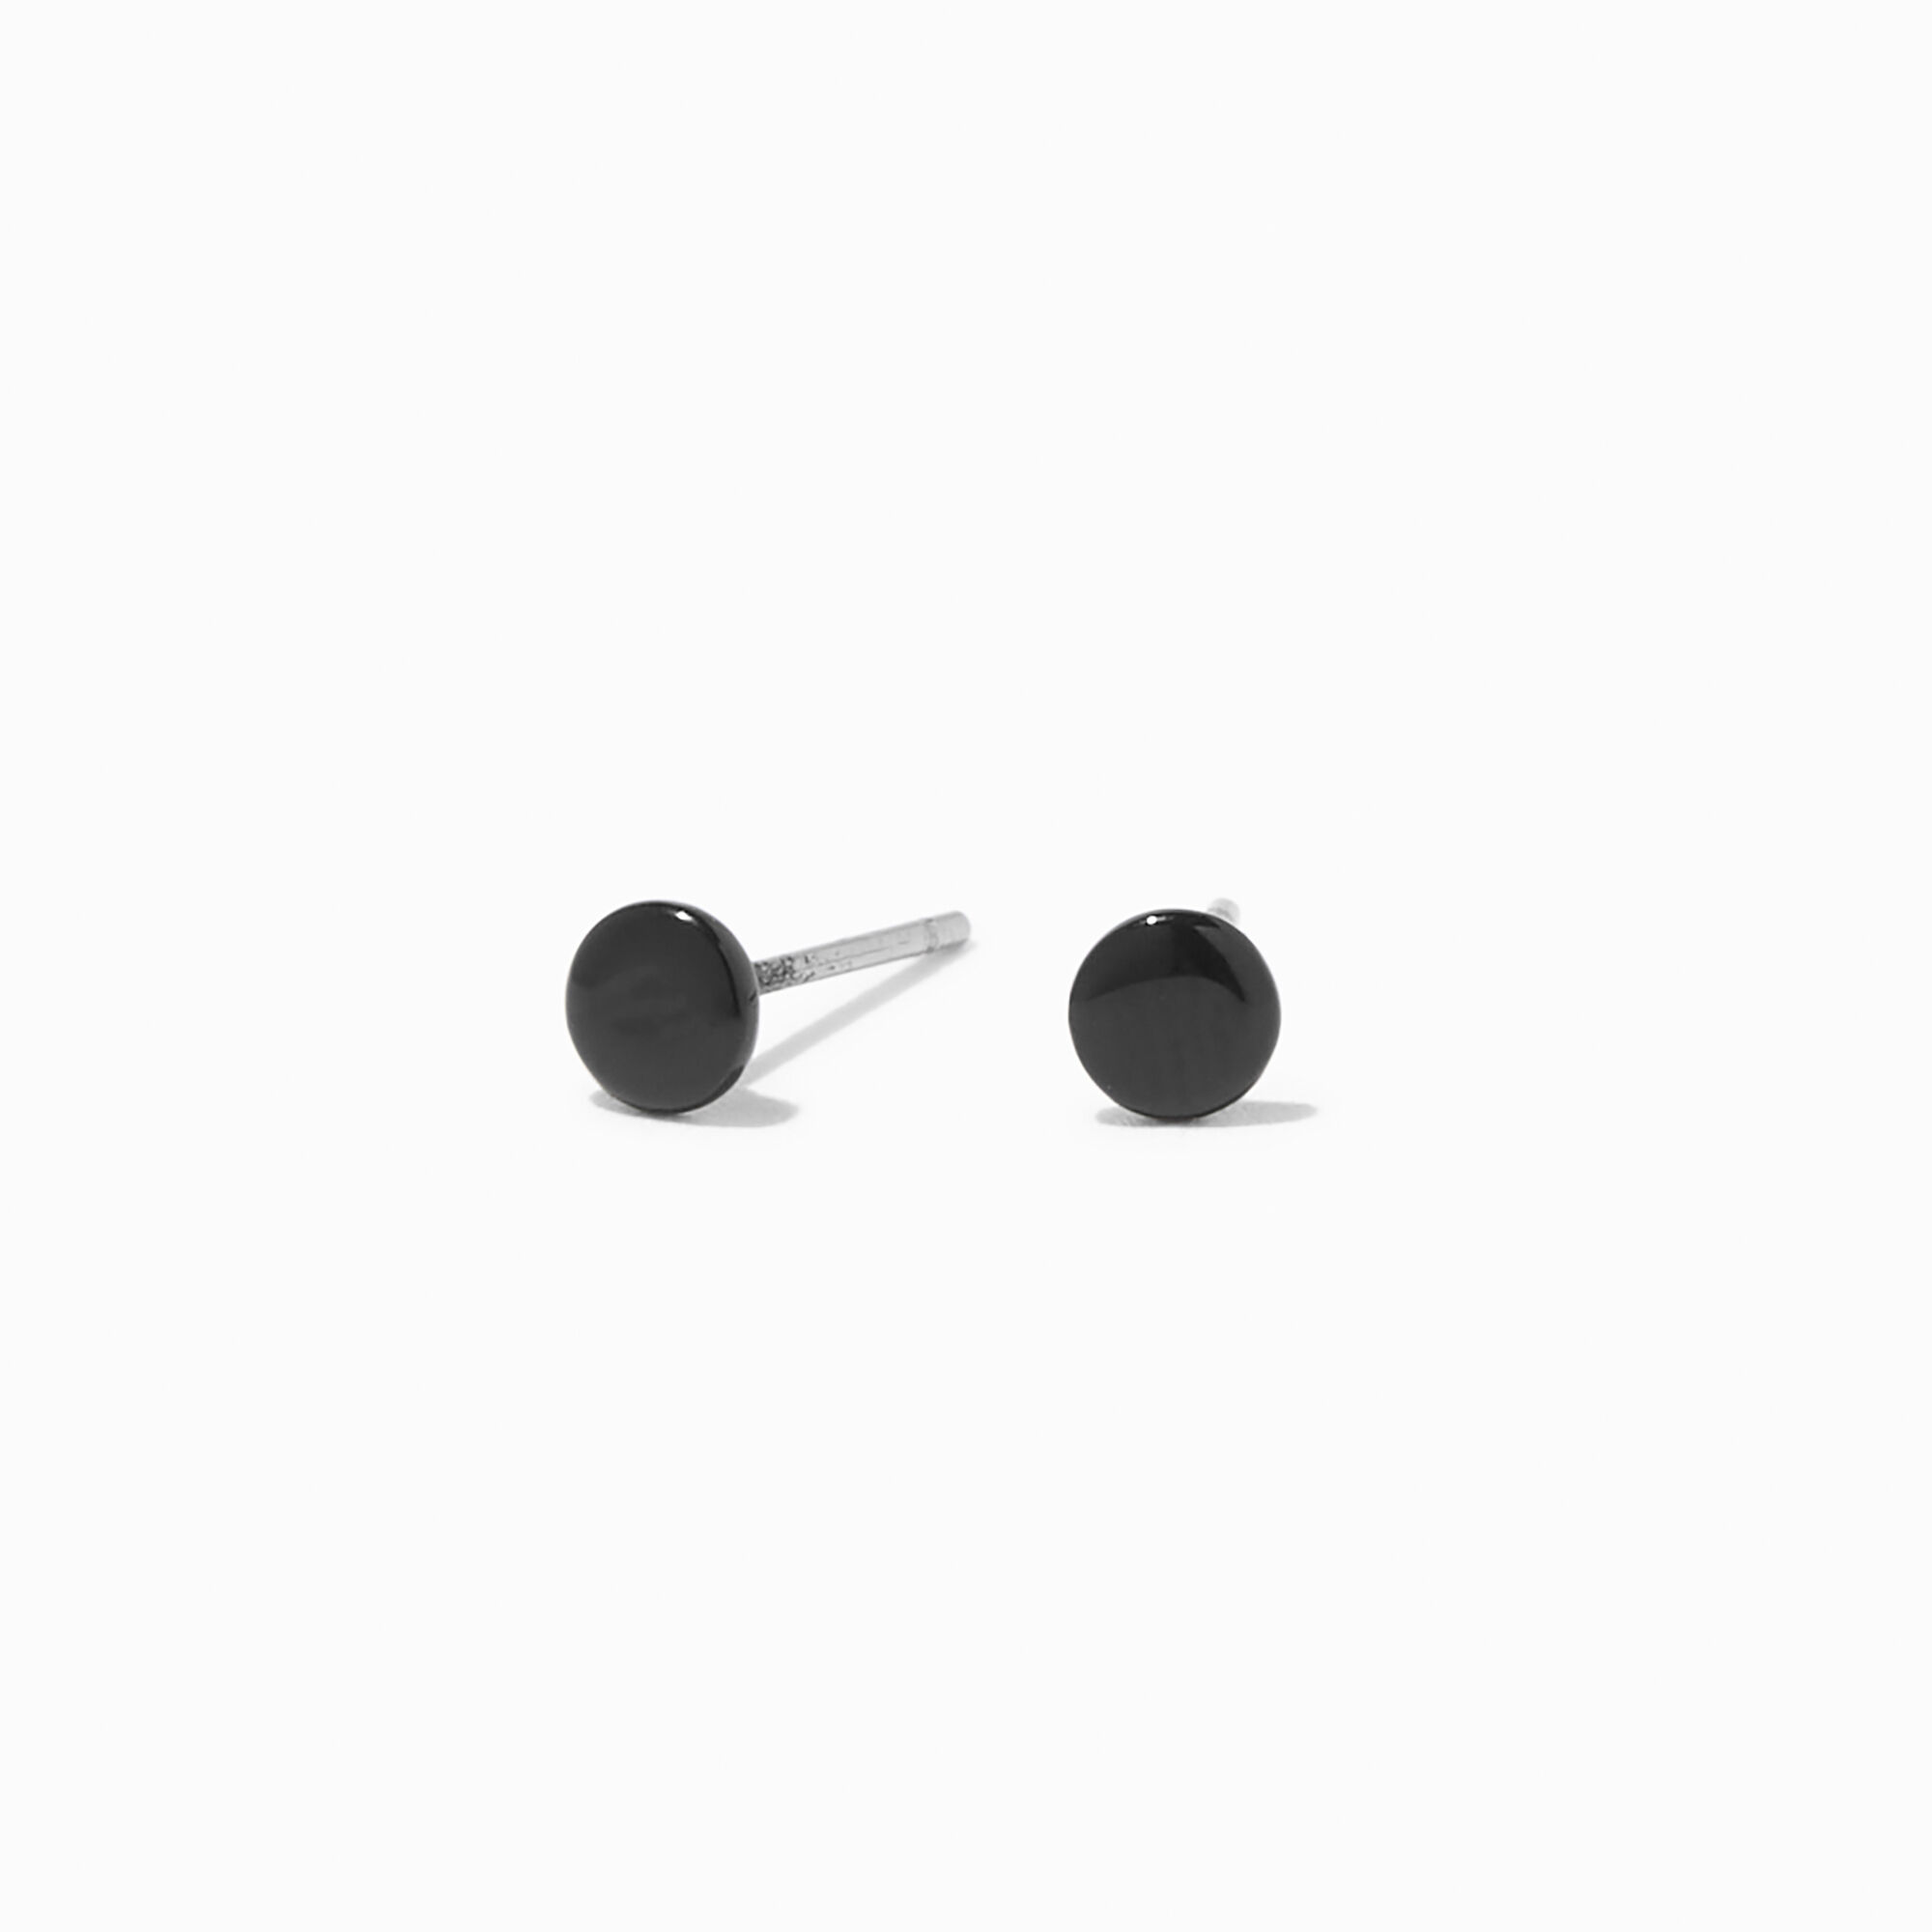 View Claires 4MM Button Stud Earrings Black information